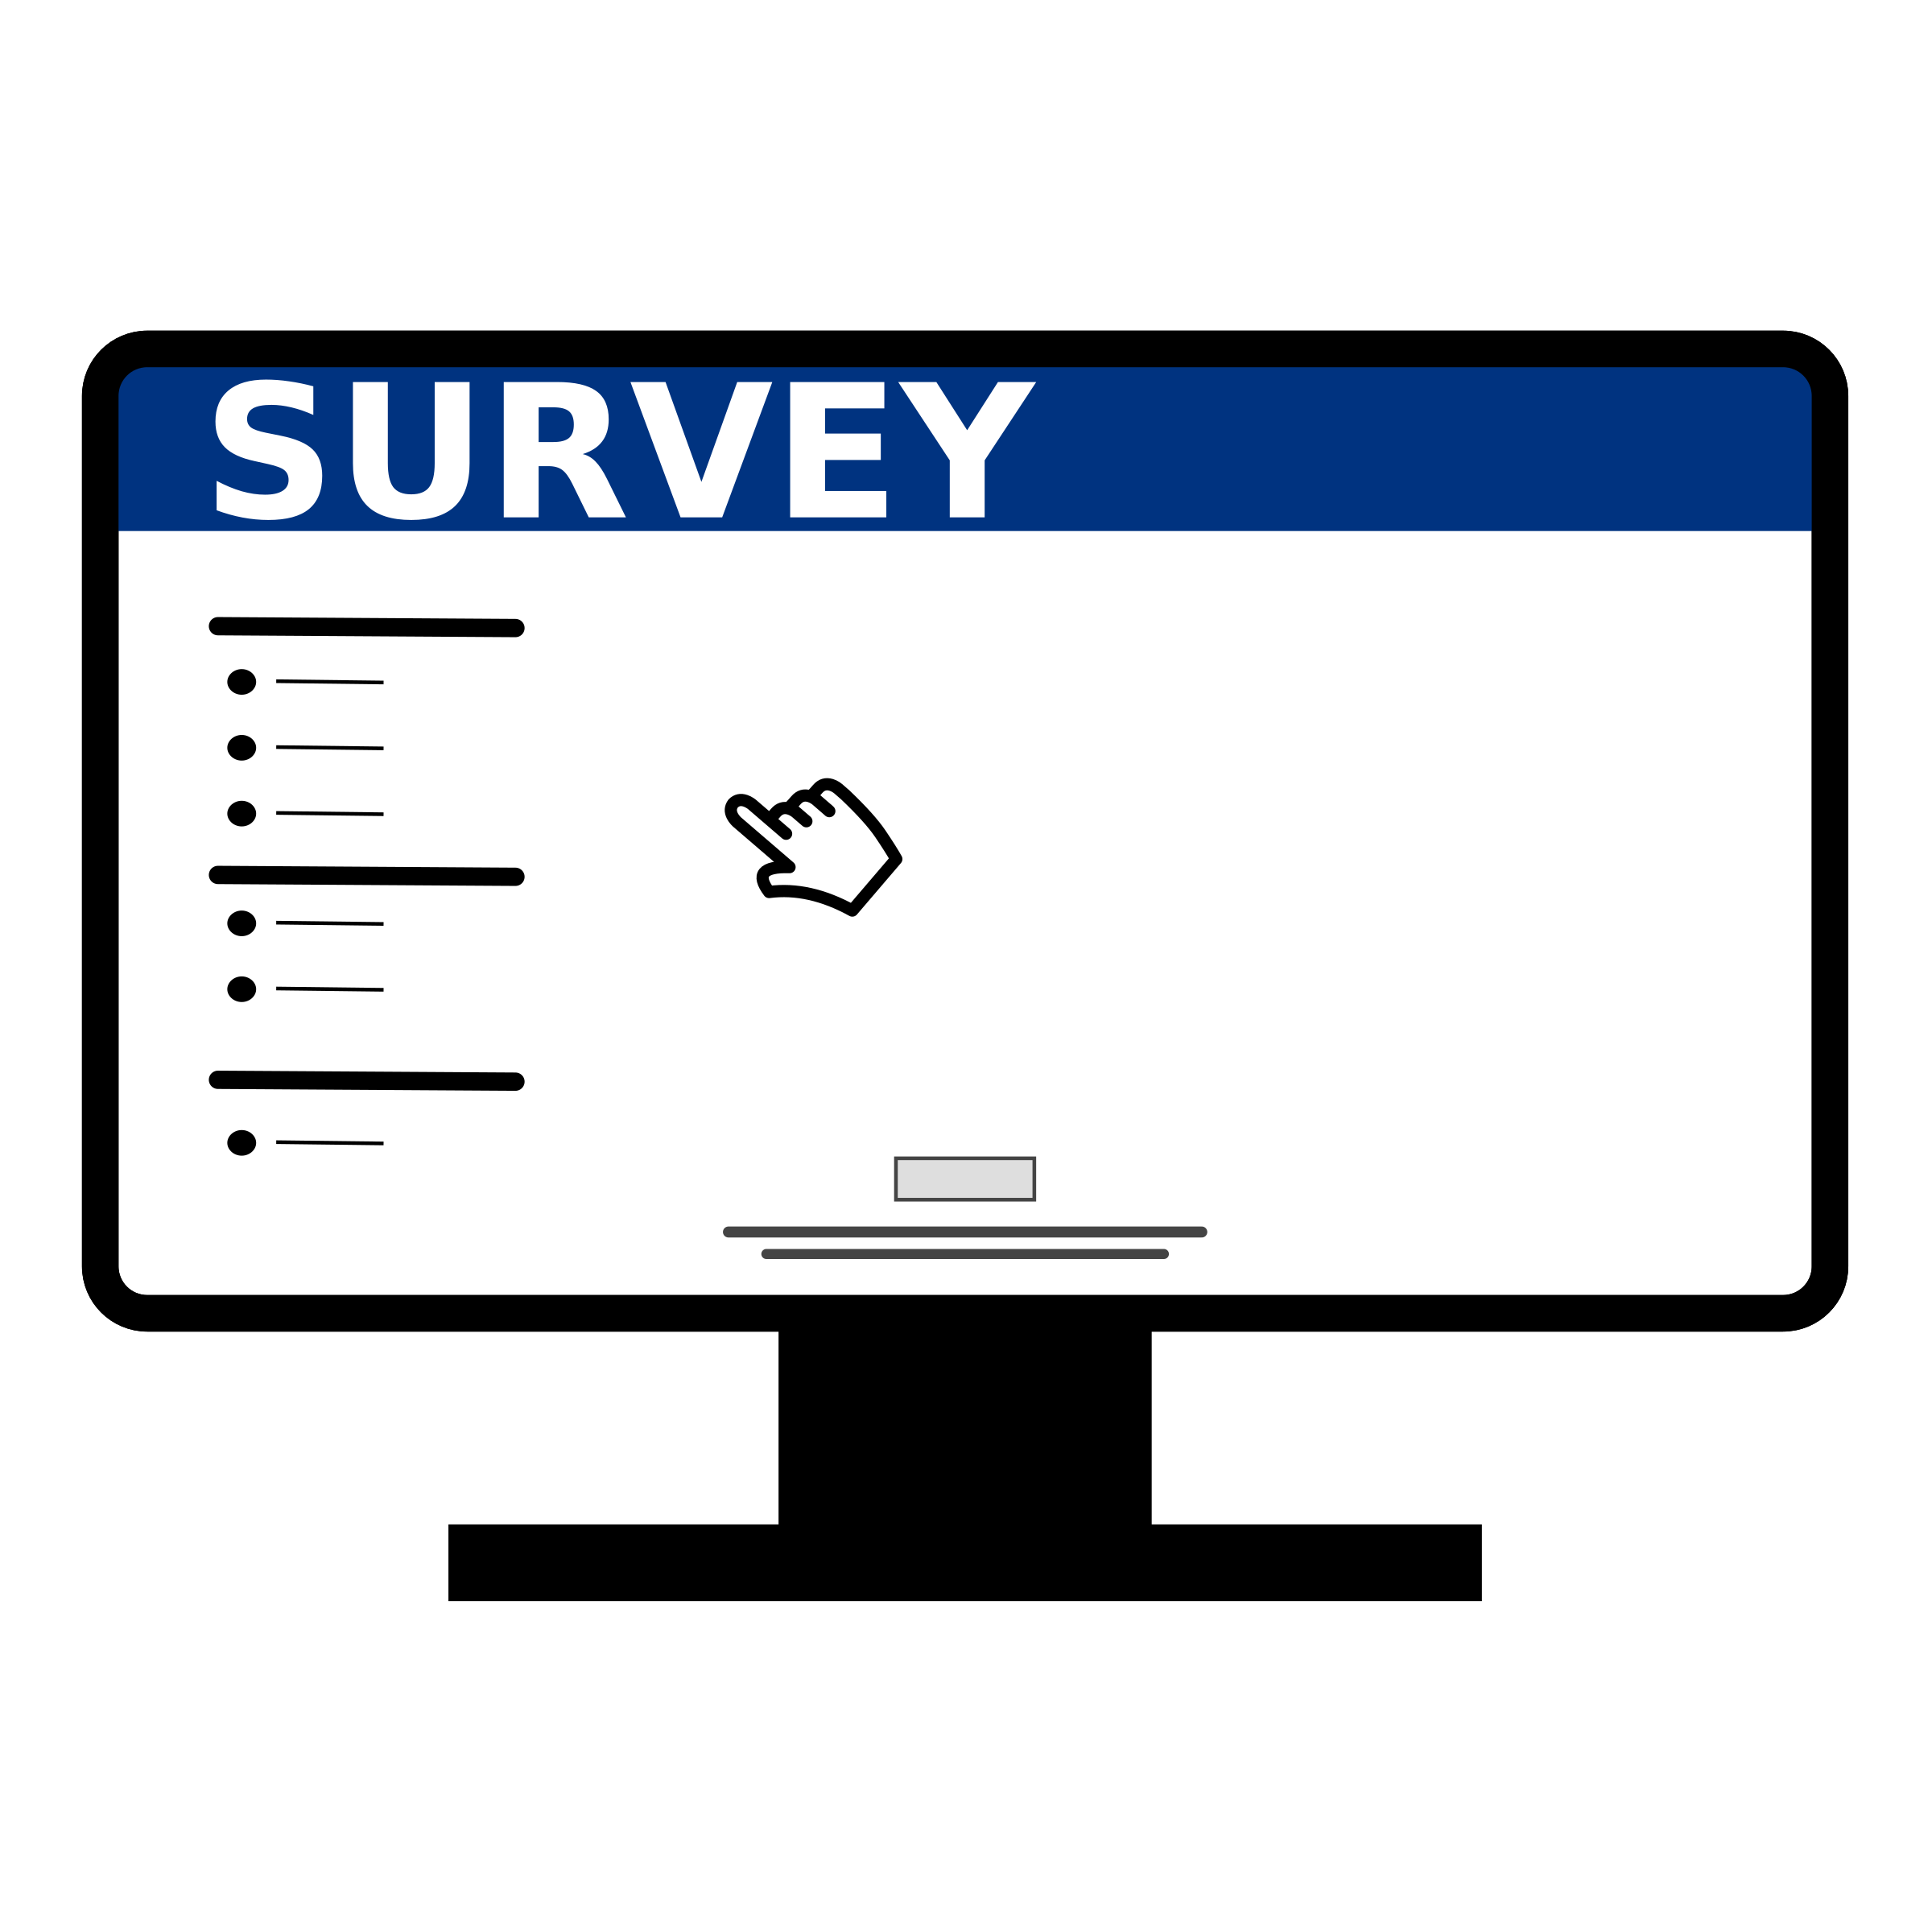 monitor showing a sample survey